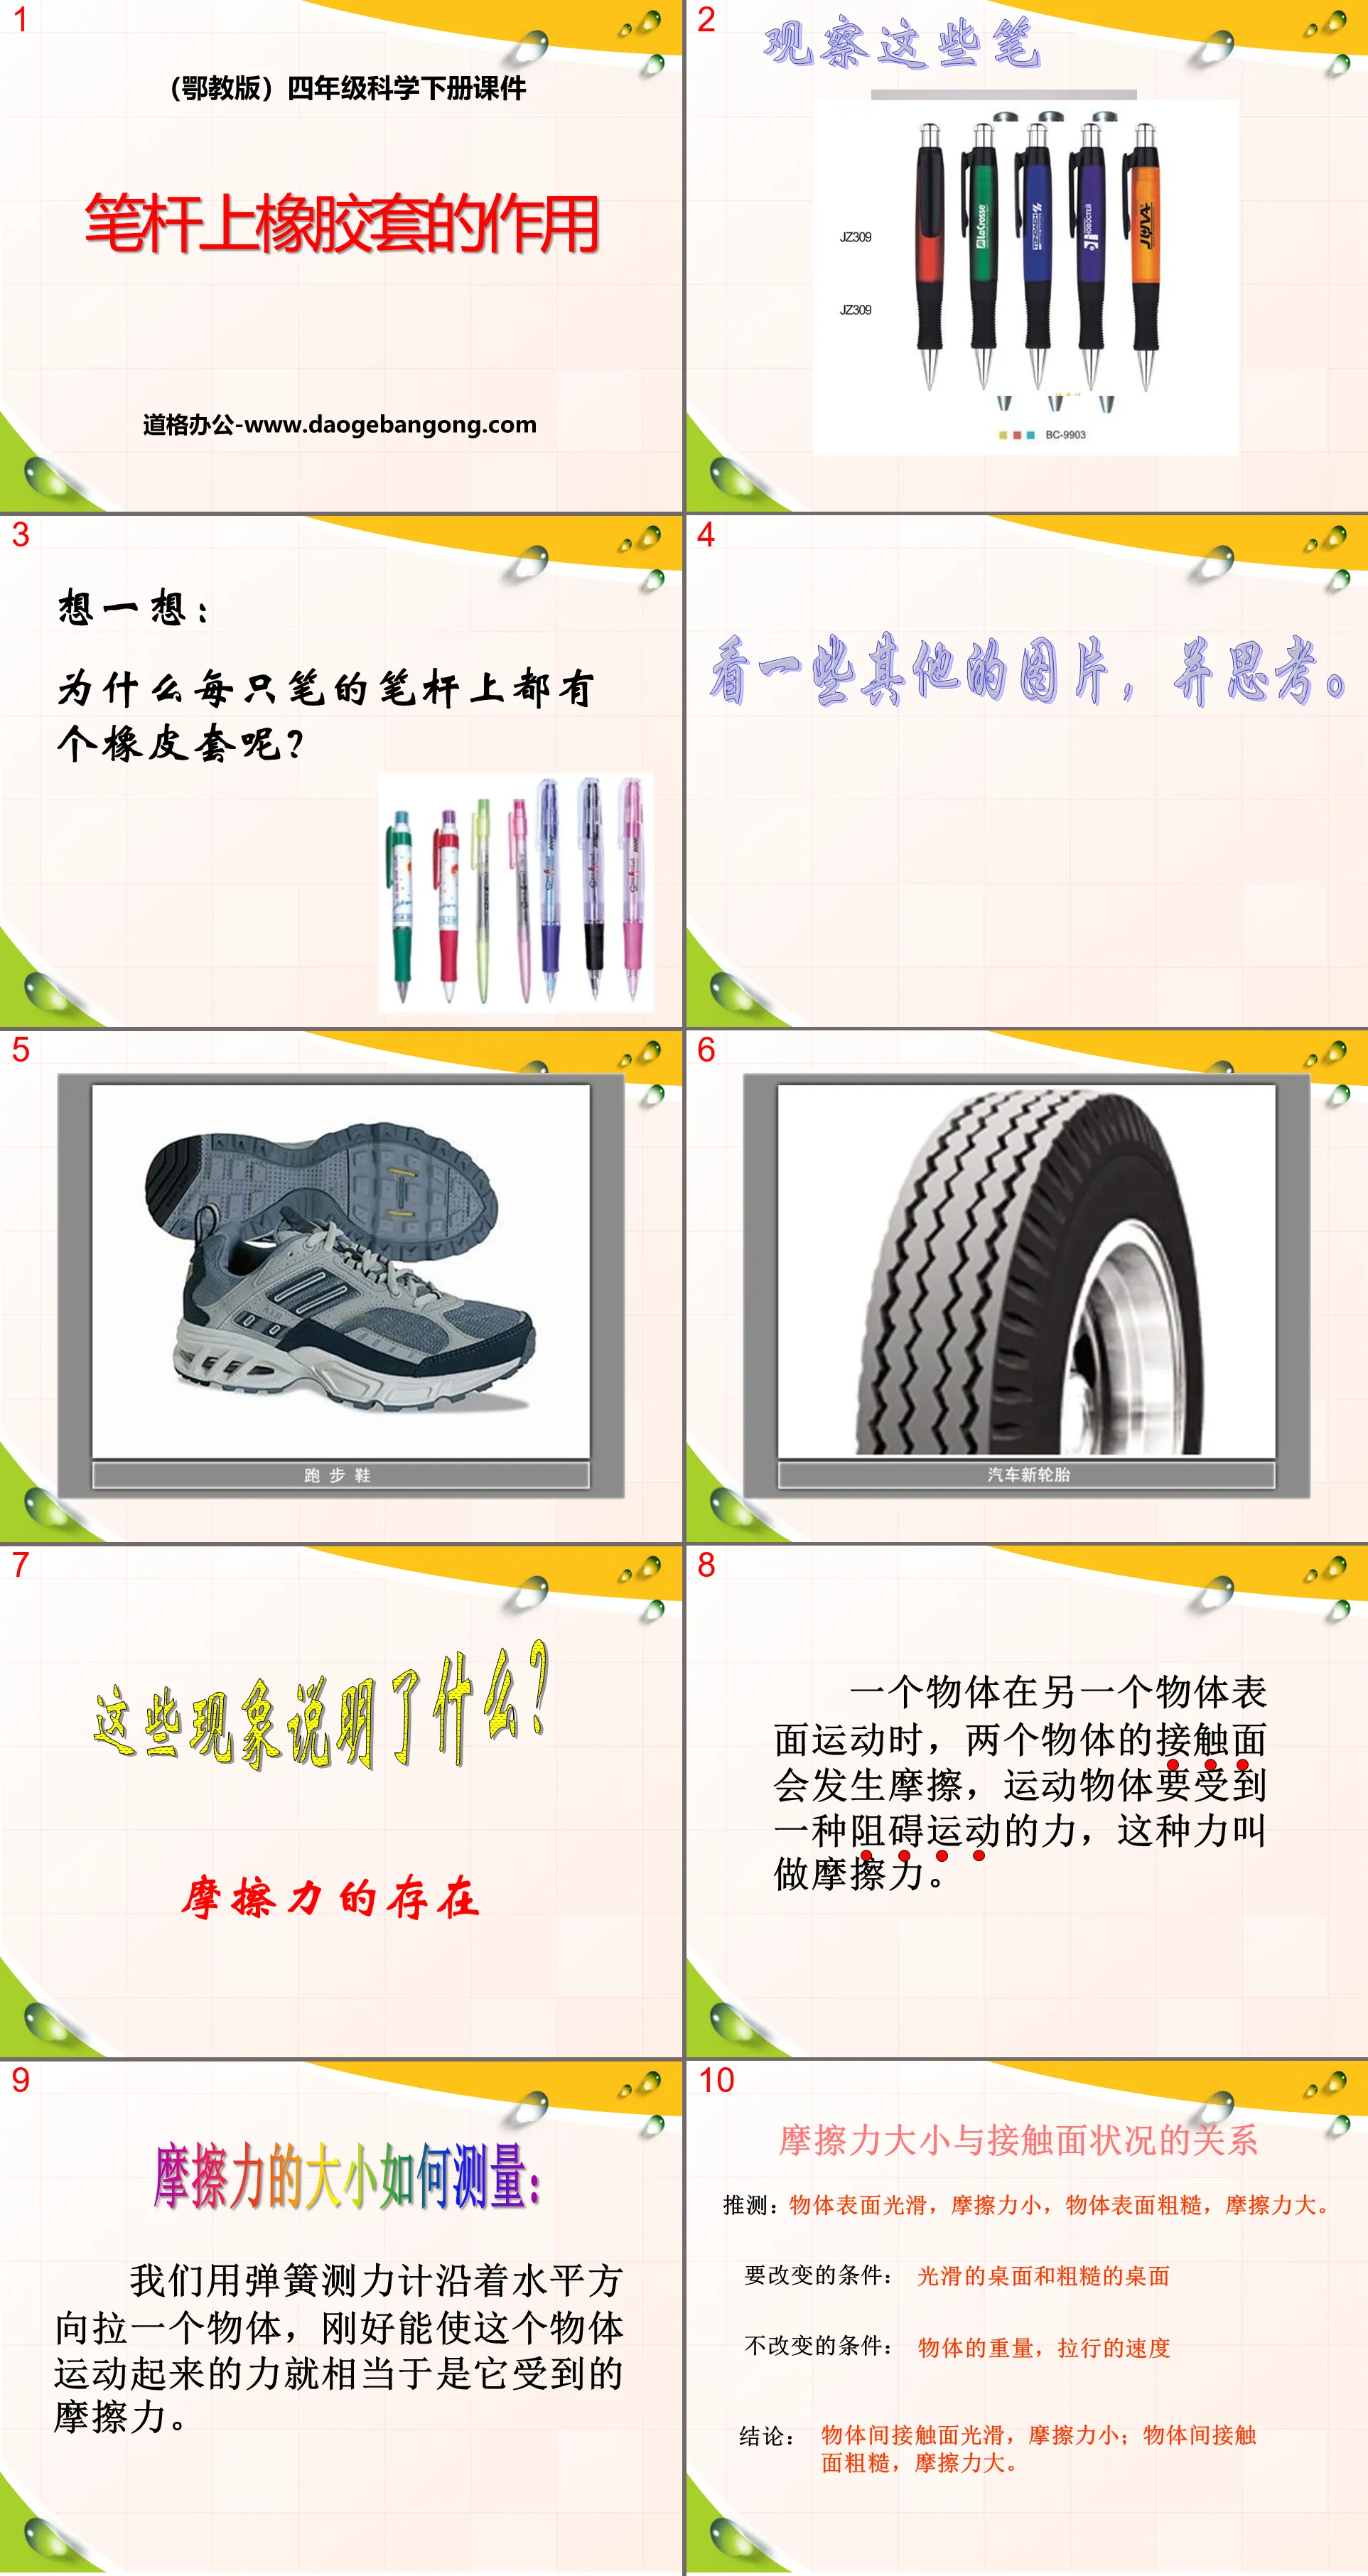 "The Function of the Rubber Cover on the Pen Holder" PPT courseware